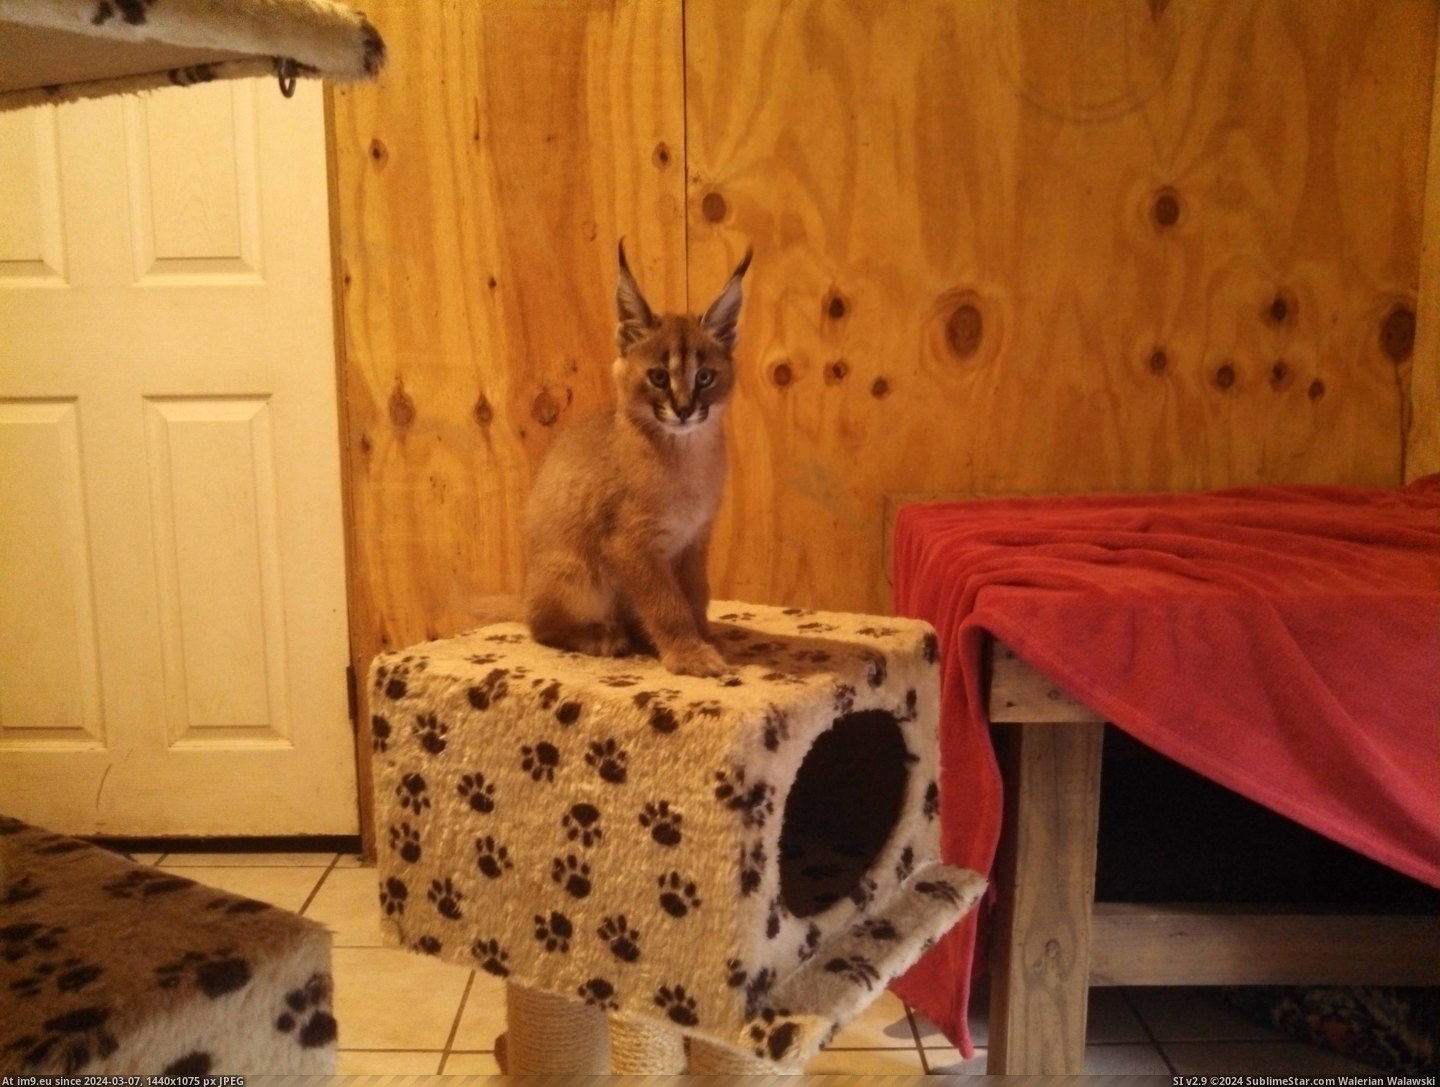 #For #Kitten #Caracal #Naja #Meet #Place [Aww] Is this the right place for a caracal kitten? Meet Naja. Pic. (Изображение из альбом My r/AWW favs))